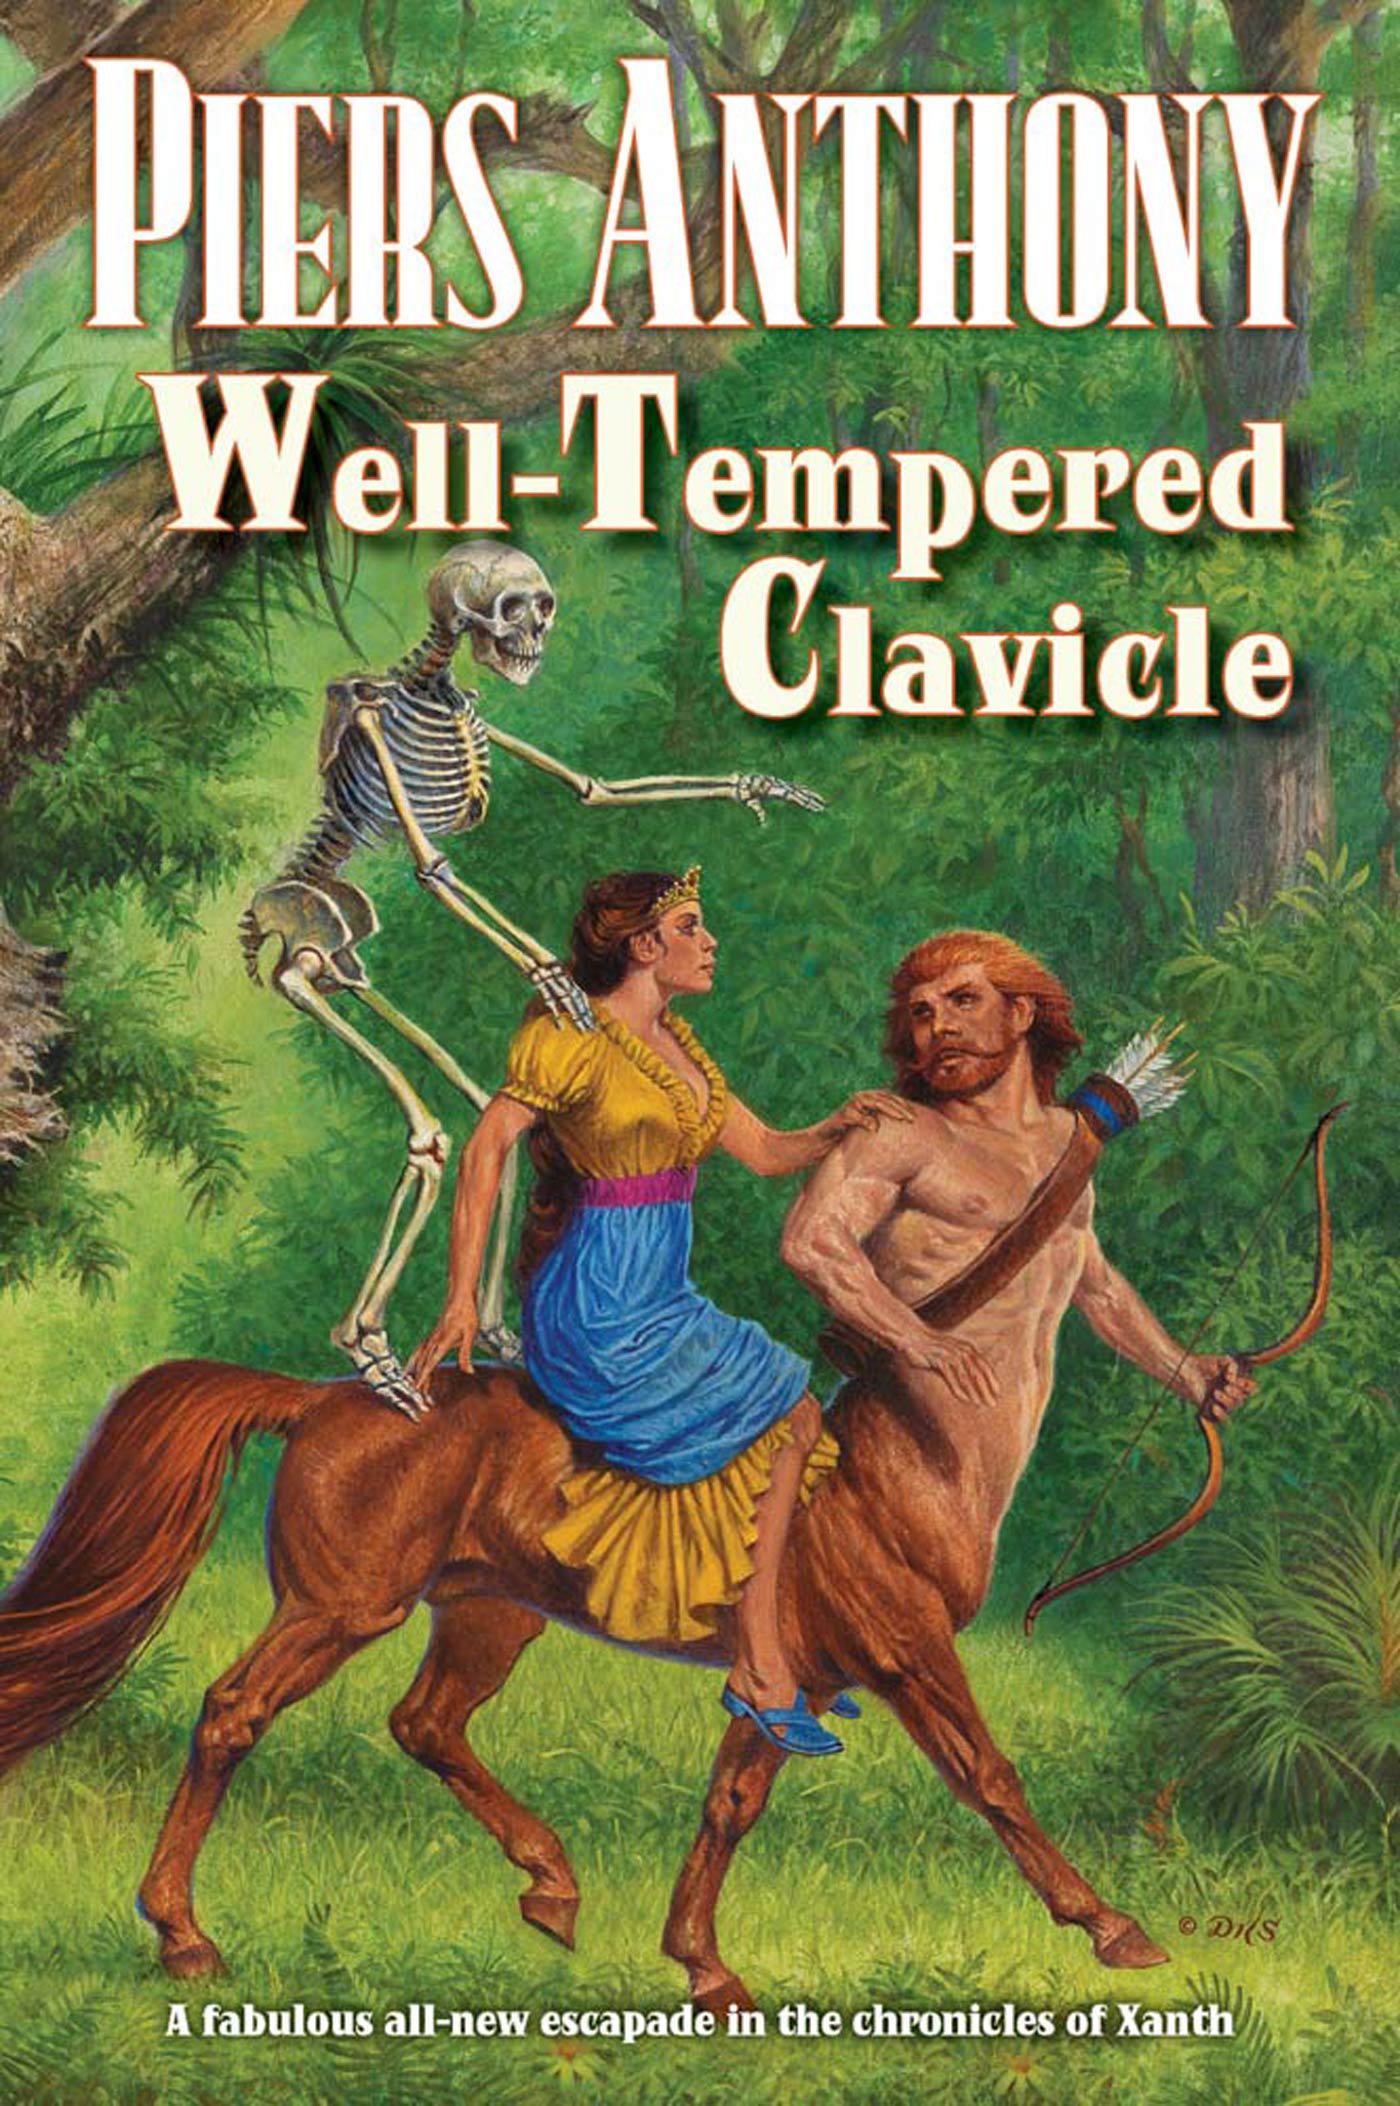 Well-Tempered Clavicle : A Fabulous Escapade in the Land of Xanth by Piers Anthony